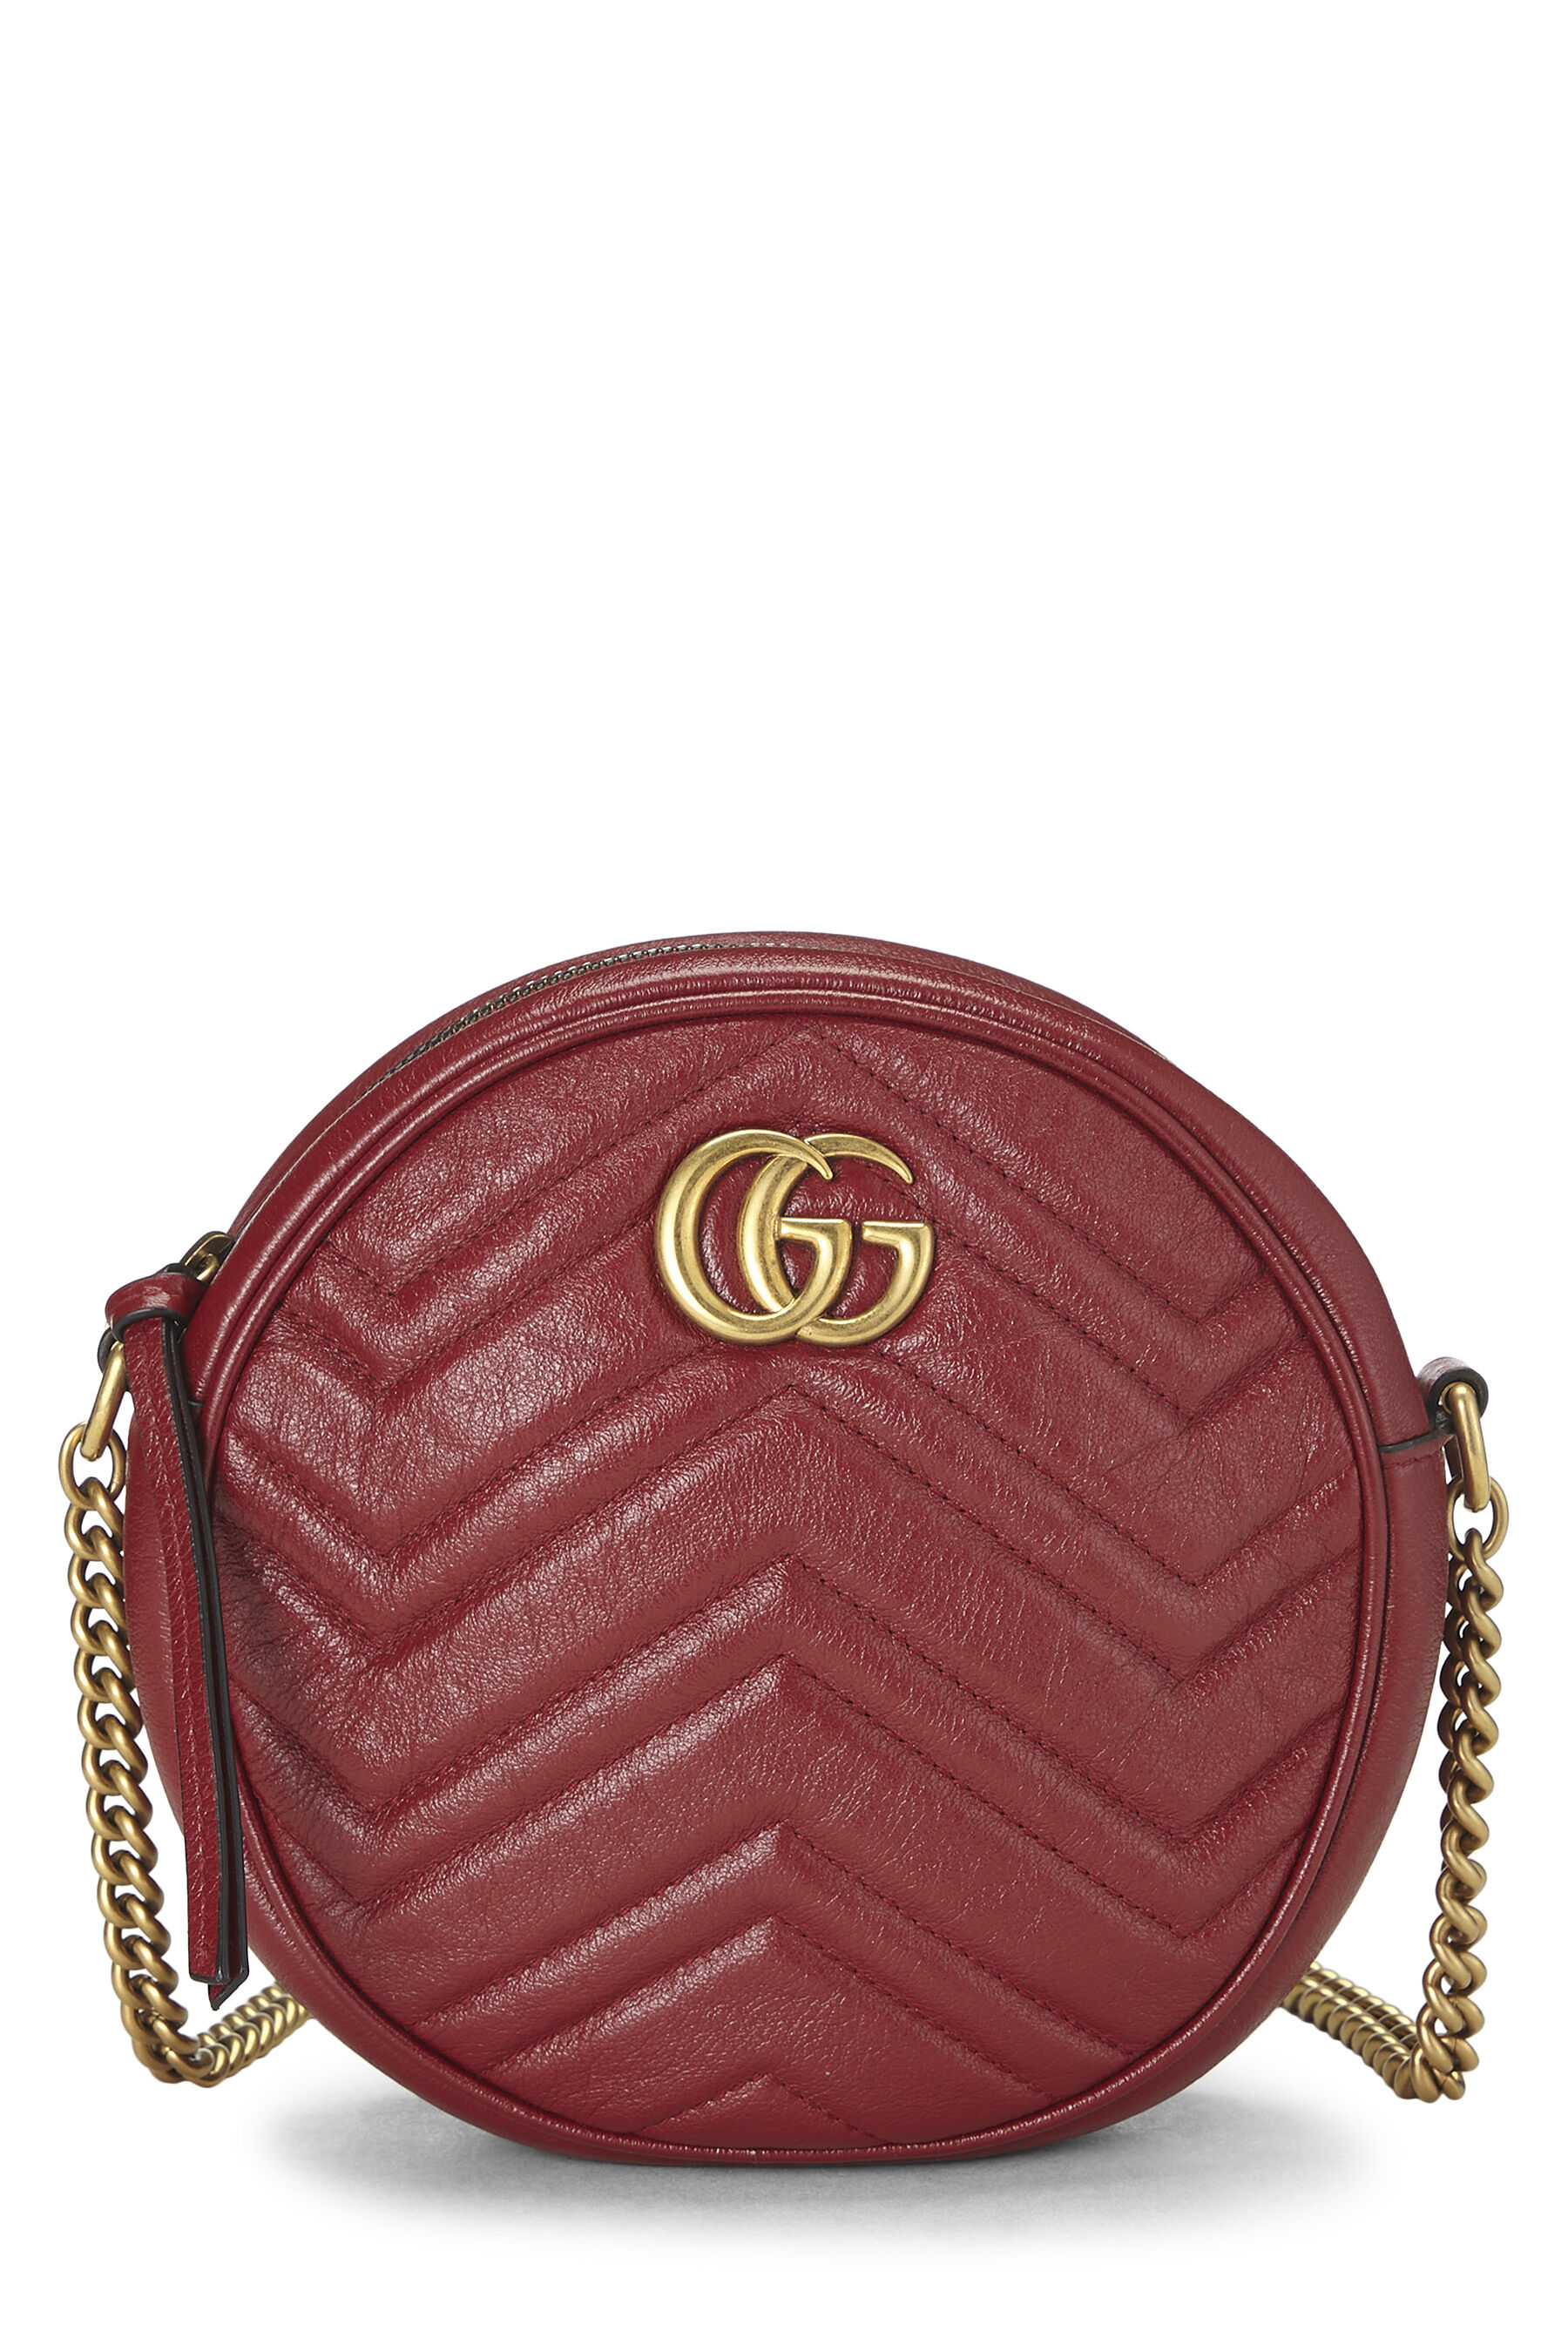 Gucci Red Leather GG Marmont Round Shoulder Bag Mini